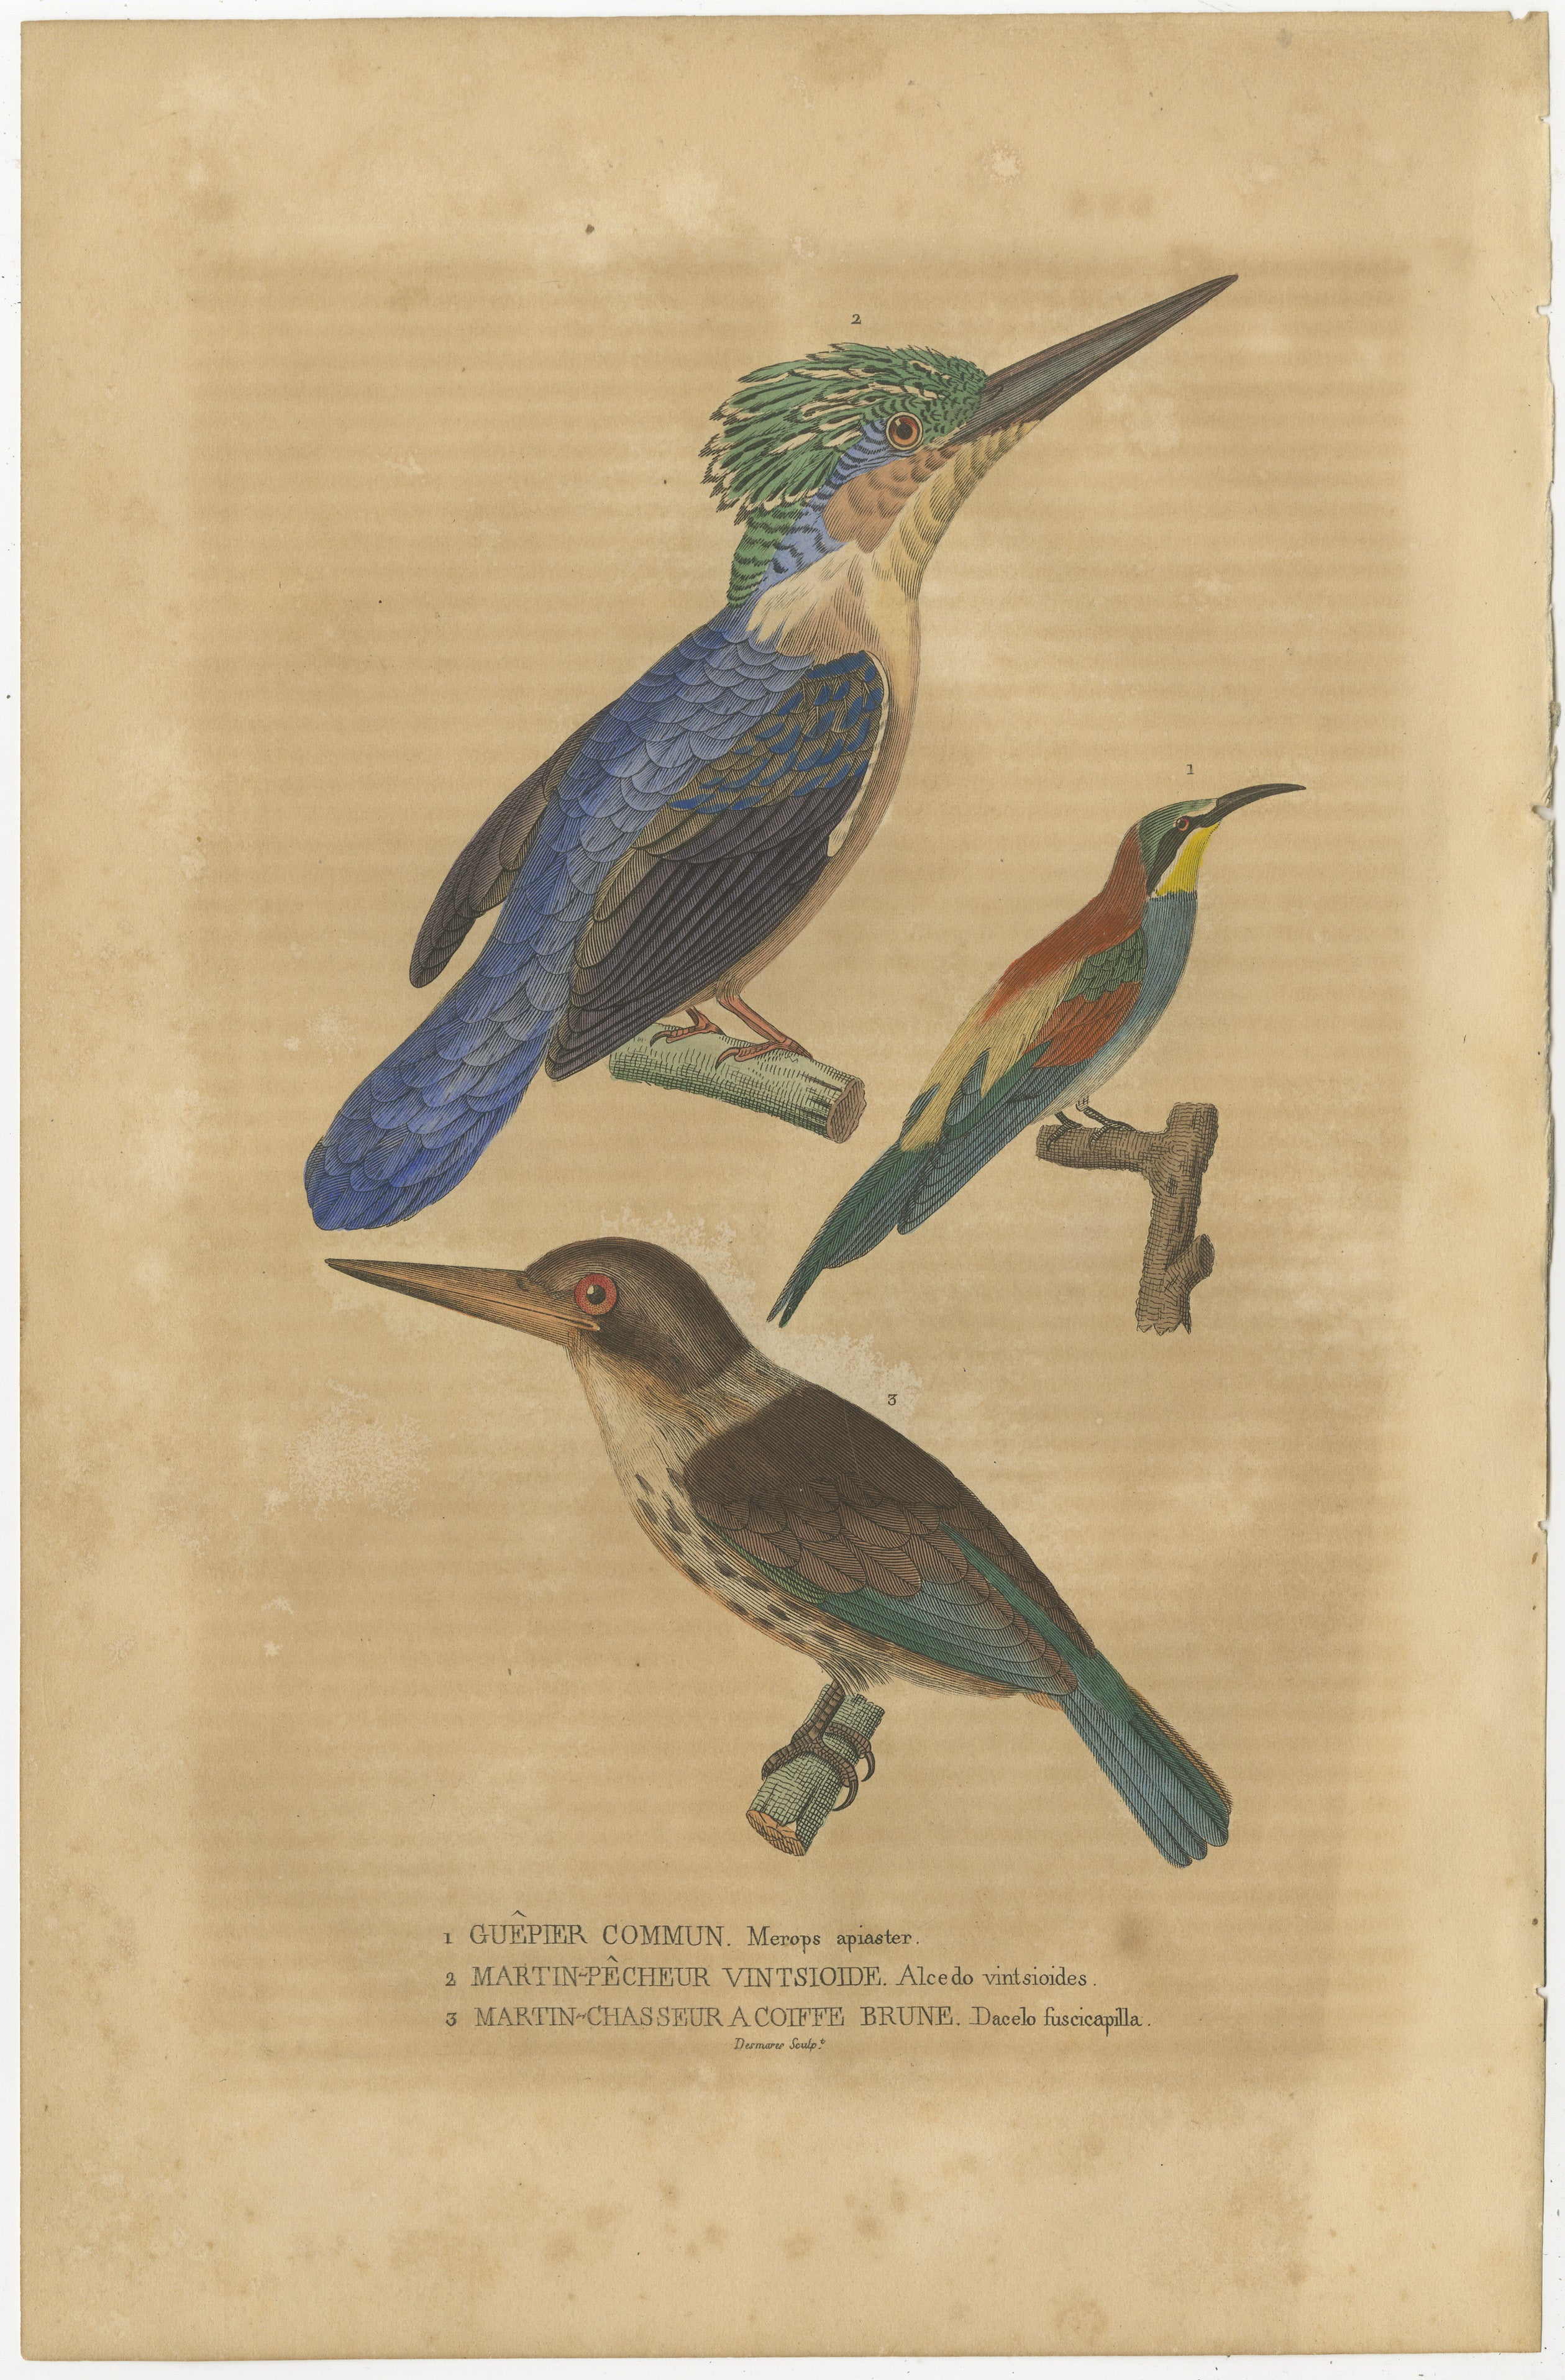 The translations of the bird names from French to English are as follows:

Guepier Commun - European Bee-Eater
Martin-Pêcheur Vintsioides - Common Kingfisher
Martin-chasseur à coiffe brune - Brown-hooded Kingfisher

The hand-colored print presents a